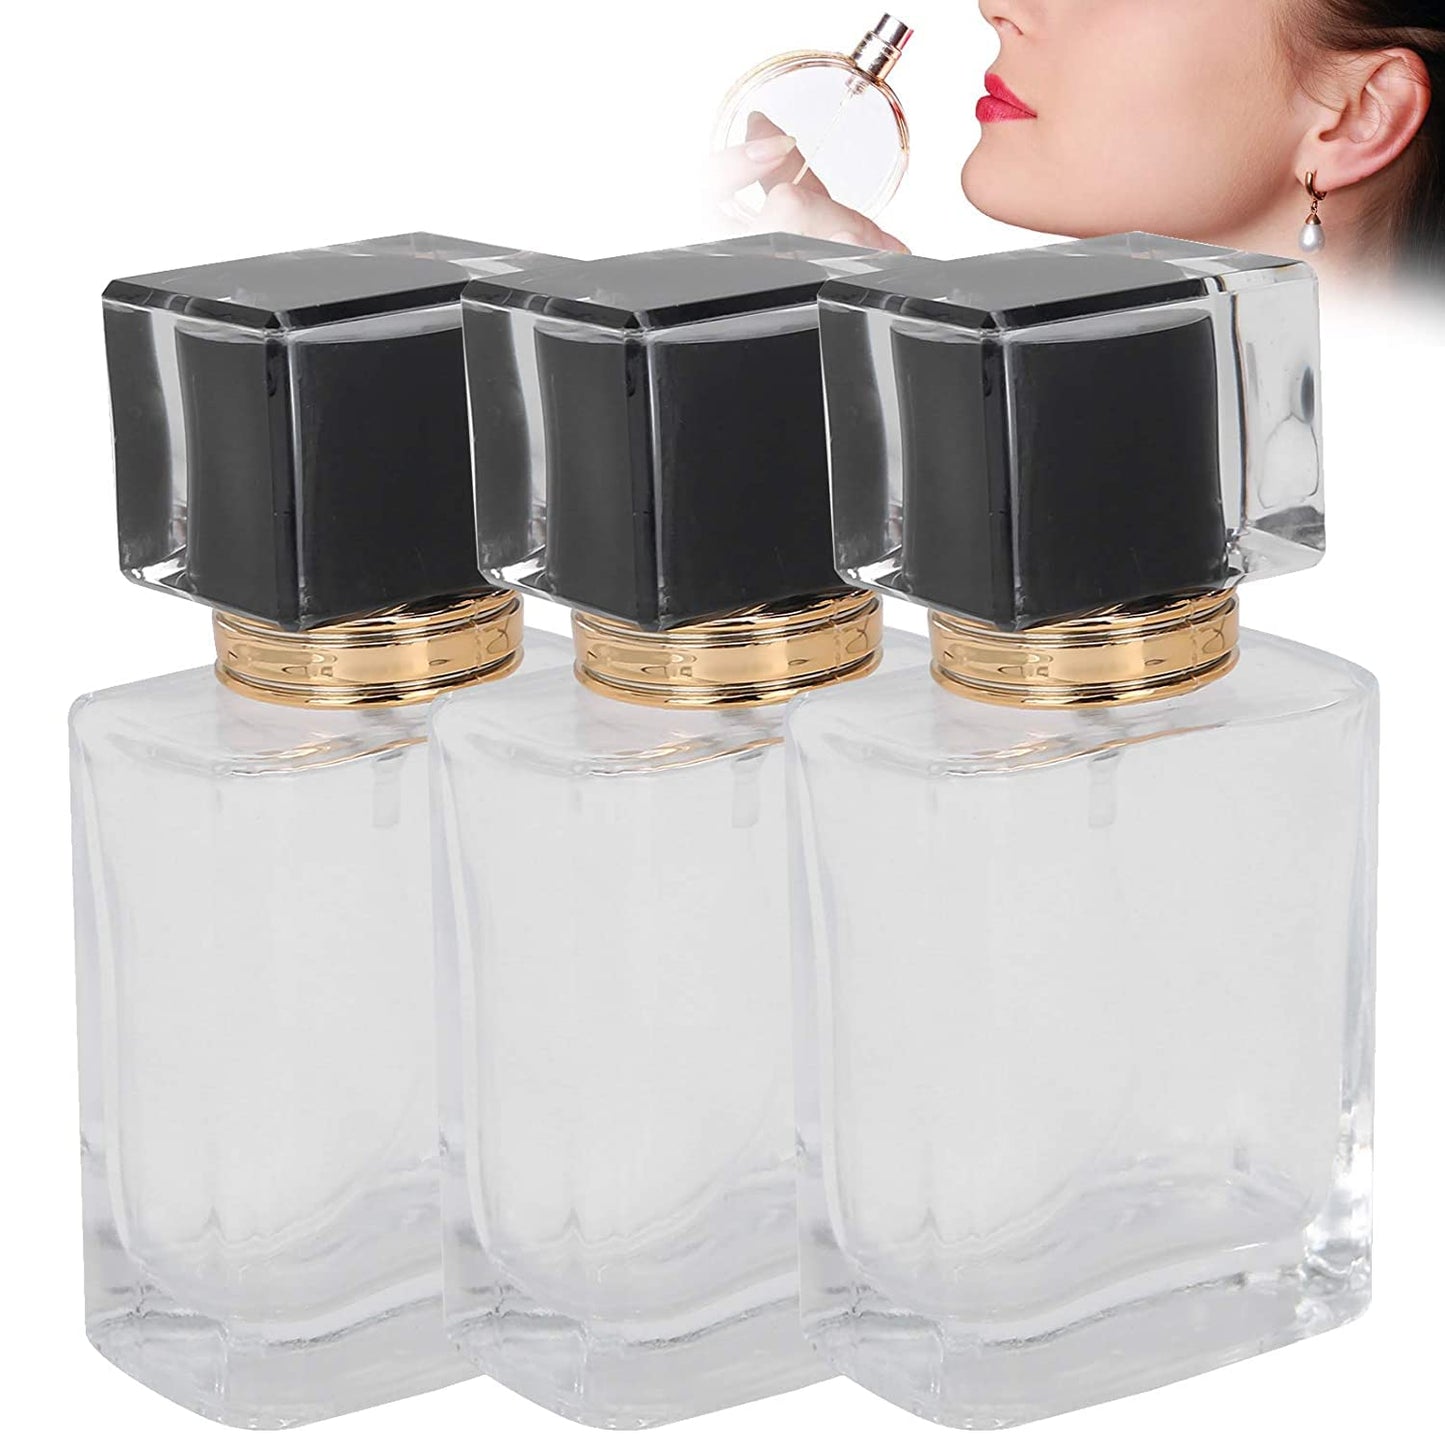 Spray Bottles, 3Pcs 50ml/1.69 Oz Square Empty Frosted Glass Spray Bottles Perfume Atomizer, Refillable Fine Mist Spray Empty Perfume Bottles, for Essential Oils, Makeup Toner Lotion (Clear)